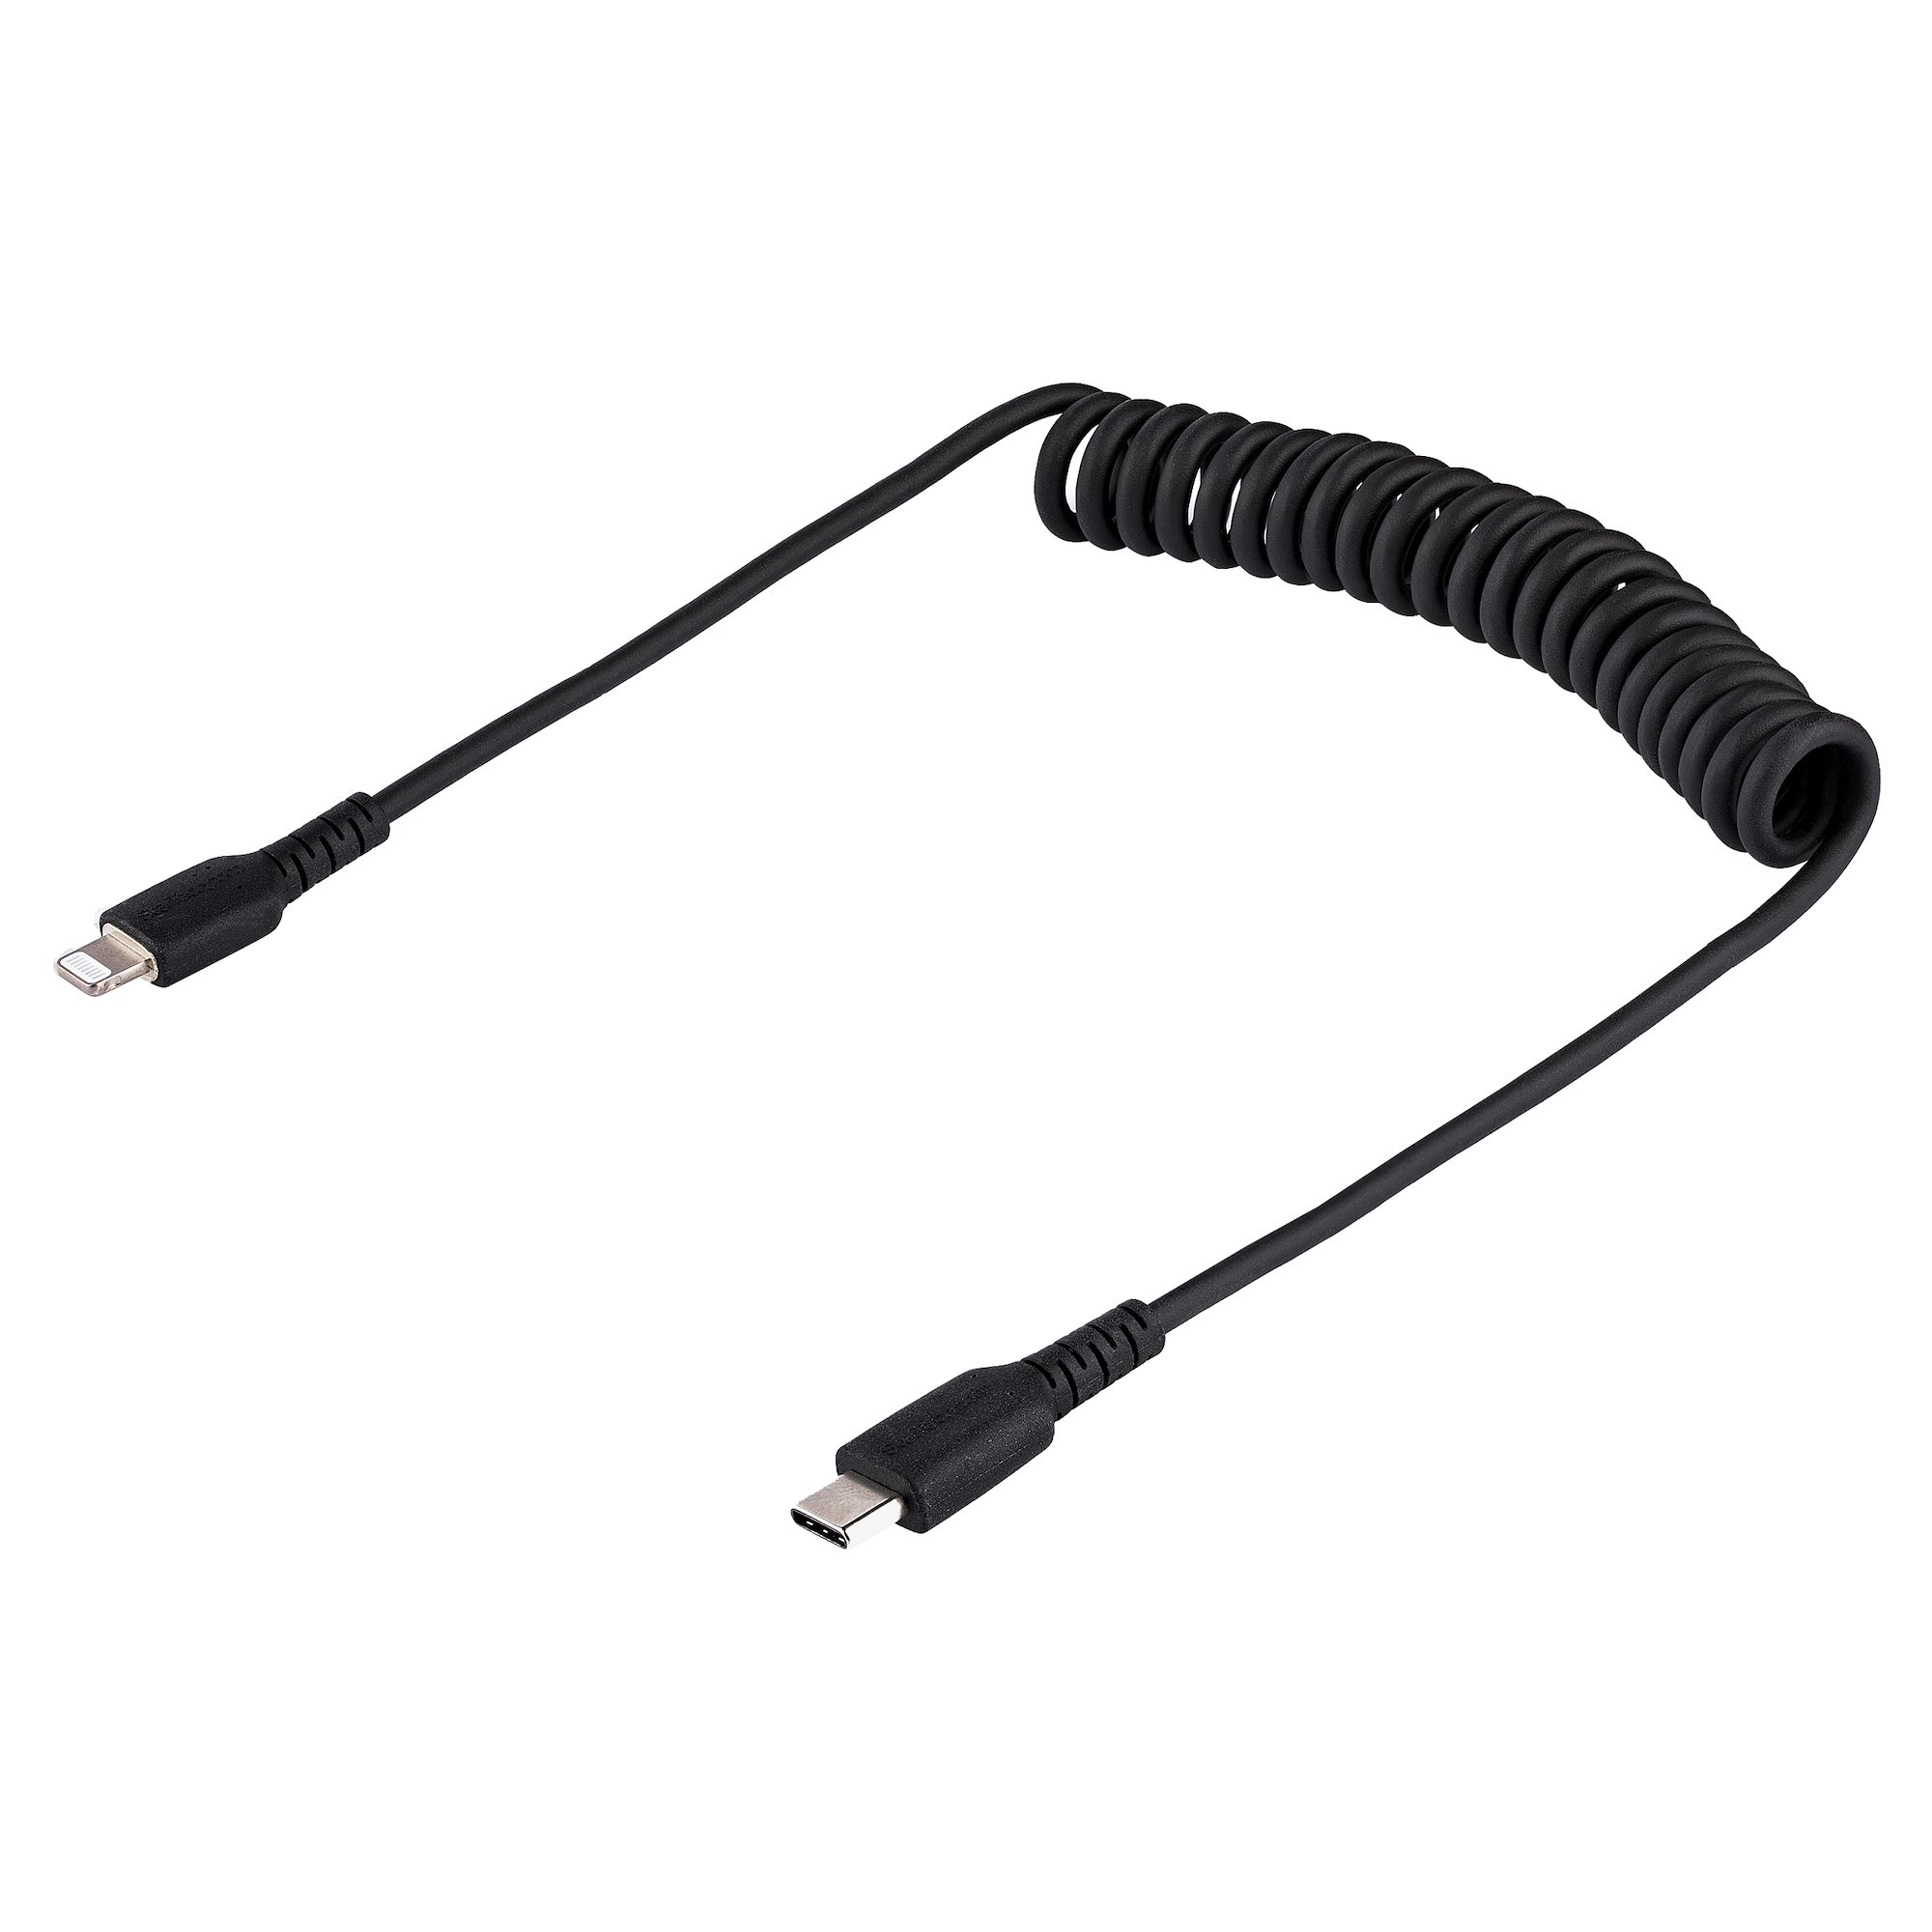 50cm/20in USB C Lightning Cable, Coiled - Lightning Cables, Cables